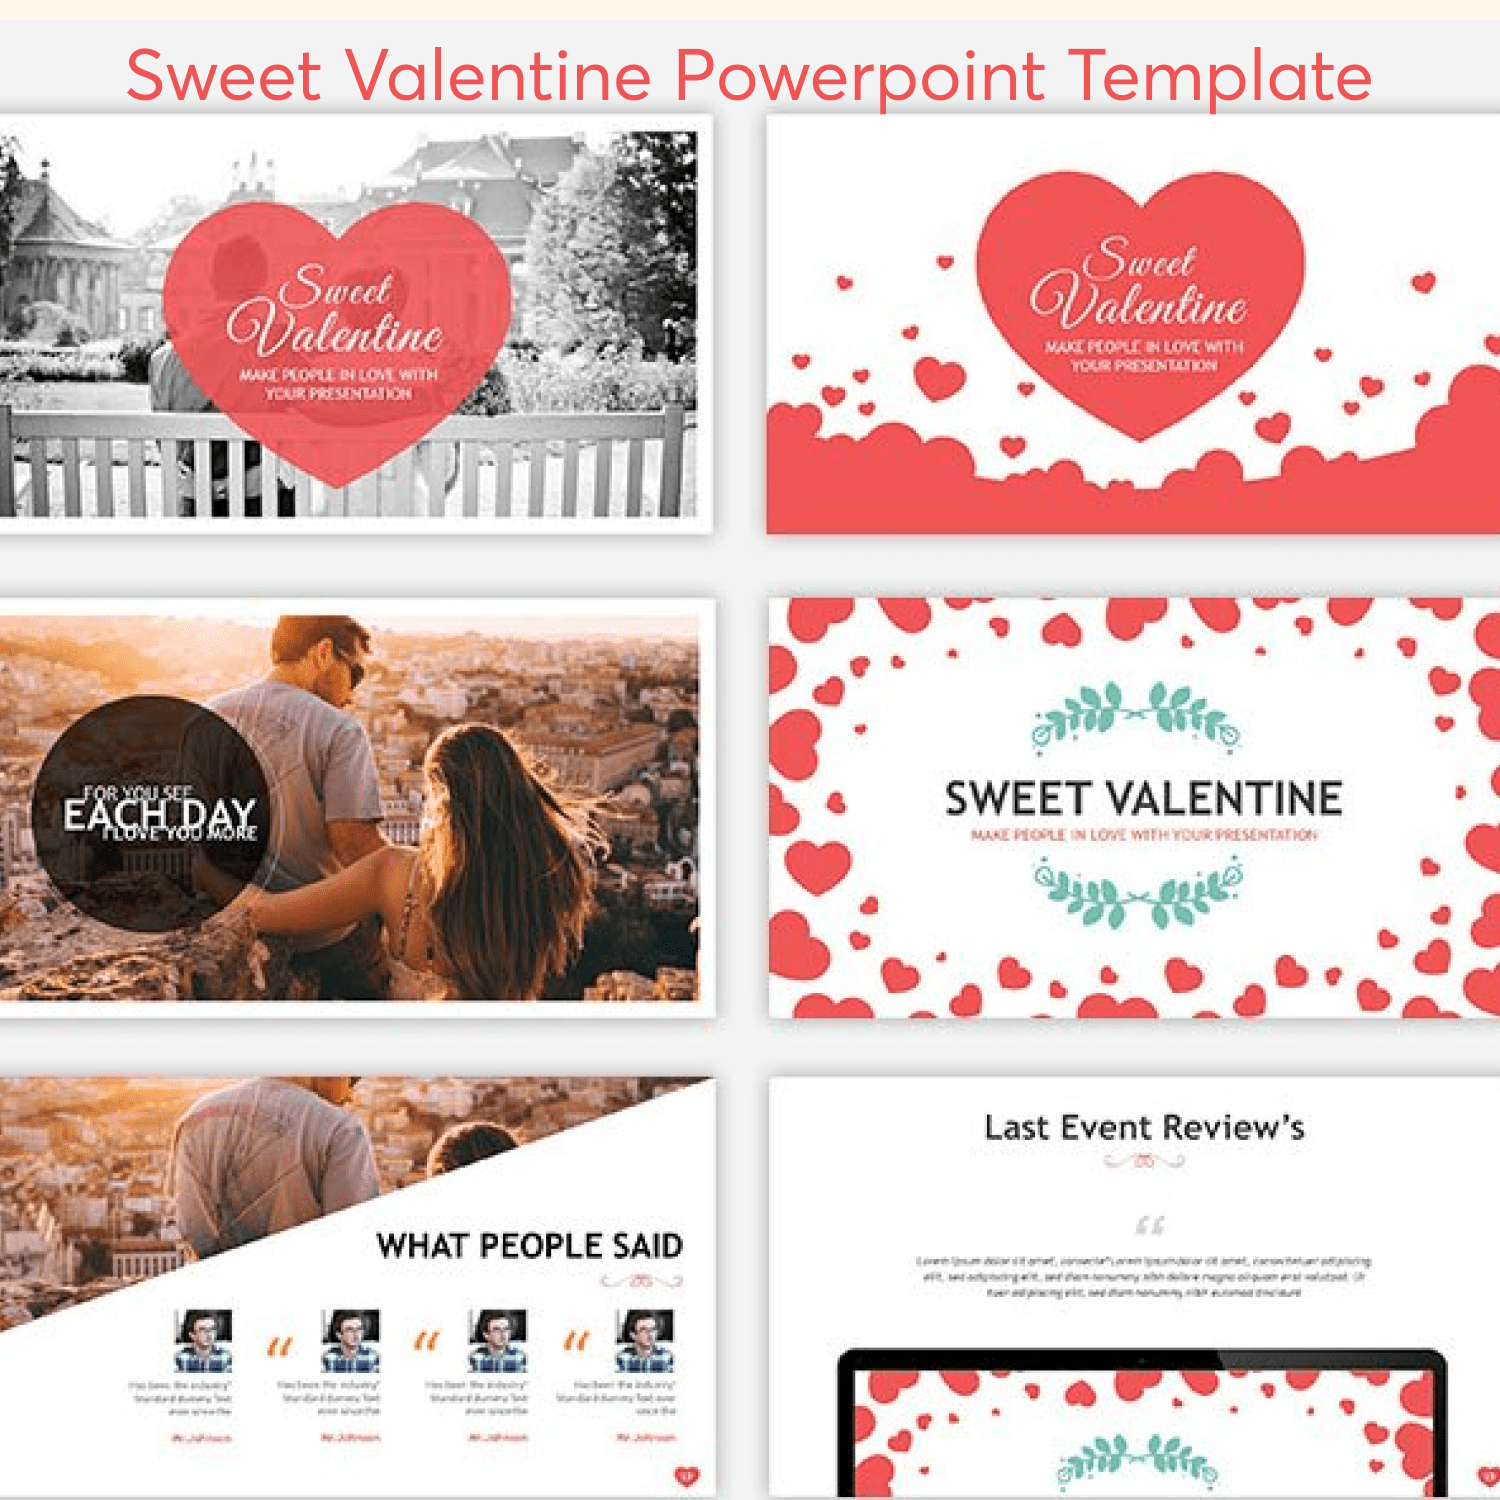 Sweet Valentine Powerpoint Template cover.